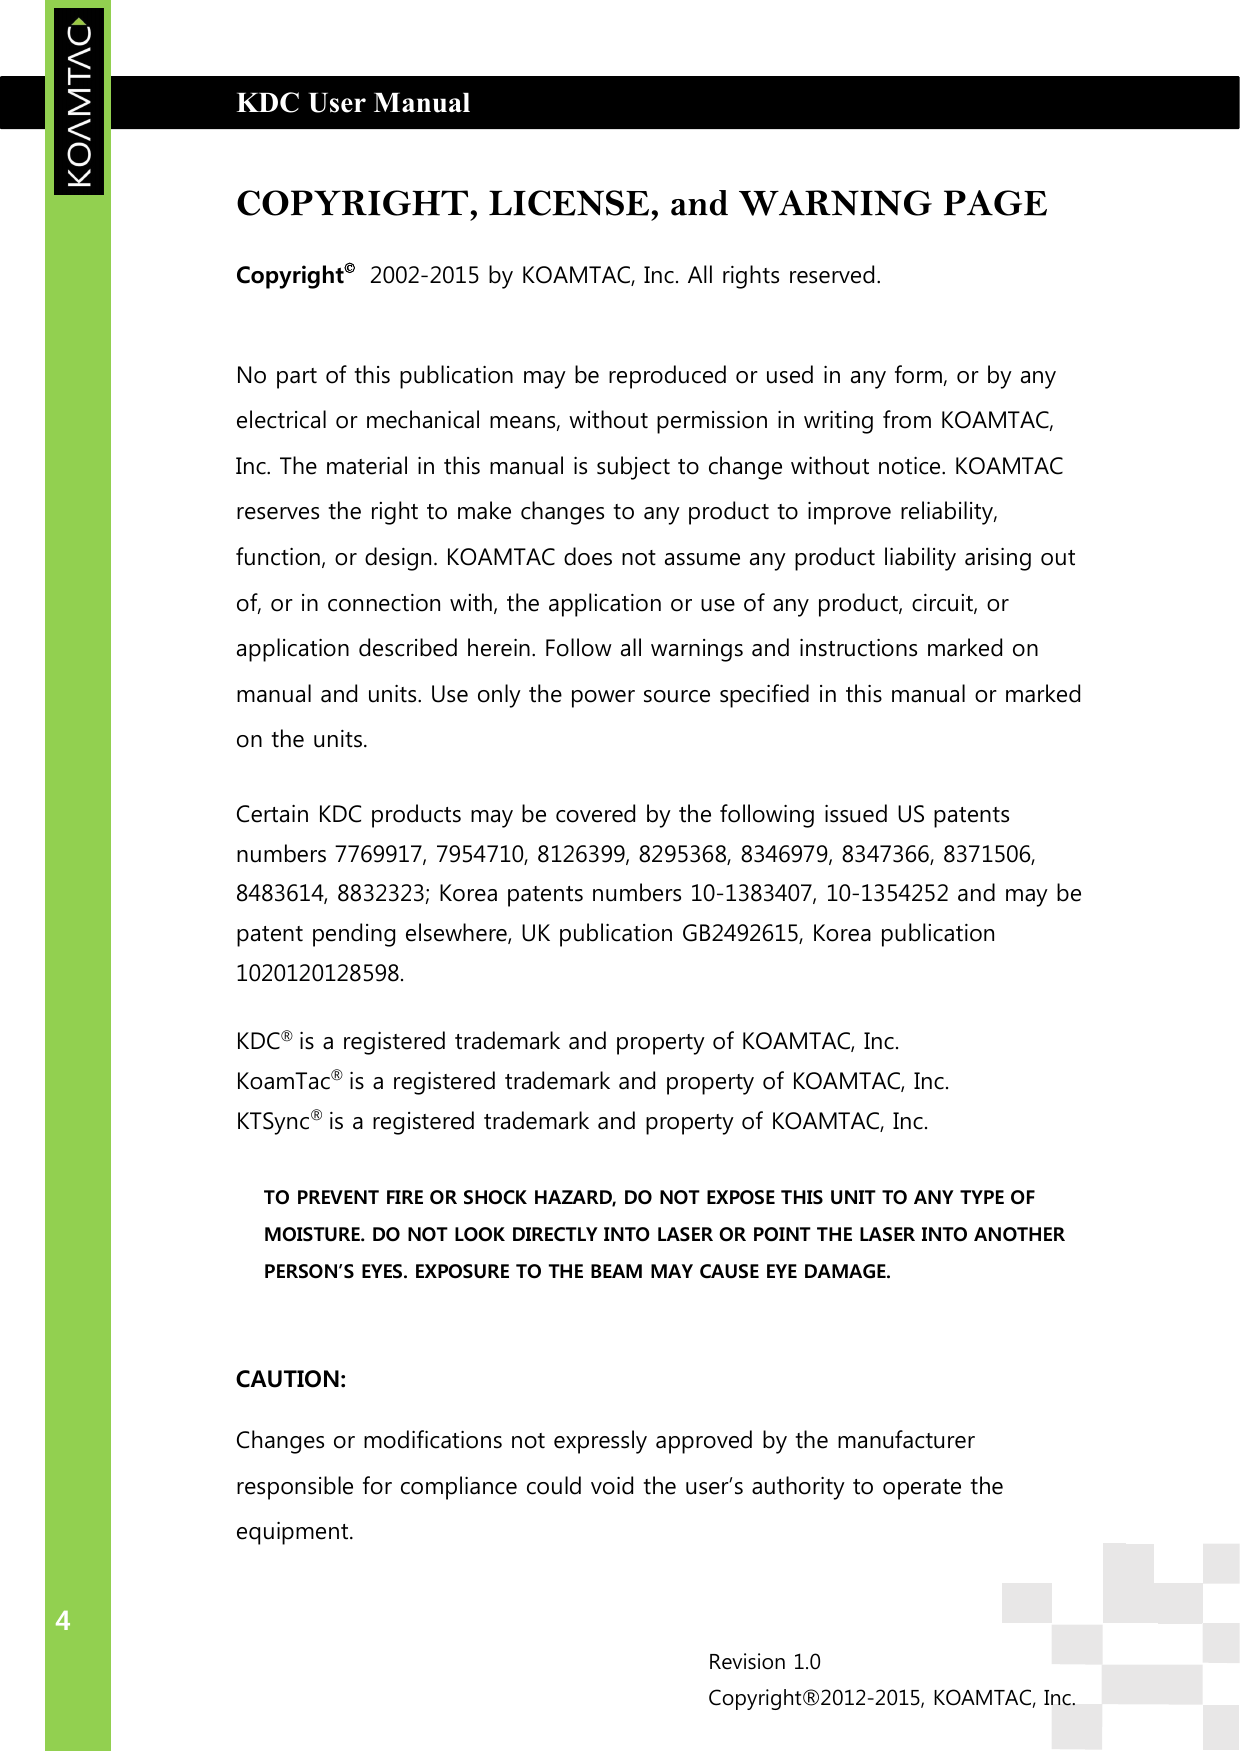  KDC User Manual                                                                         INTRODUCTION 4 Revision 1.0 Copyright®2012-2015, KOAMTAC, Inc.  COPYRIGHT, LICENSE, and WARNING PAGE Copyright   2002-2015 by KOAMTAC, Inc. All rights reserved.  No part of this publication may be reproduced or used in any form, or by any electrical or mechanical means, without permission in writing from KOAMTAC, Inc. The material in this manual is subject to change without notice. KOAMTAC reserves the right to make changes to any product to improve reliability, function, or design. KOAMTAC does not assume any product liability arising out of, or in connection with, the application or use of any product, circuit, or application described herein. Follow all warnings and instructions marked on manual and units. Use only the power source specified in this manual or marked on the units. Certain KDC products may be covered by the following issued US patents numbers 7769917, 7954710, 8126399, 8295368, 8346979, 8347366, 8371506, 8483614, 8832323; Korea patents numbers 10-1383407, 10-1354252 and may be patent pending elsewhere, UK publication GB2492615, Korea publication 1020120128598. KDC® is a registered trademark and property of KOAMTAC, Inc. KoamTac® is a registered trademark and property of KOAMTAC, Inc. KTSync® is a registered trademark and property of KOAMTAC, Inc.   TO PREVENT FIRE OR SHOCK HAZARD, DO NOT EXPOSE THIS UNIT TO ANY TYPE OF MOISTURE. DO NOT LOOK DIRECTLY INTO LASER OR POINT THE LASER INTO ANOTHER PERSON’S EYES. EXPOSURE TO THE BEAM MAY CAUSE EYE DAMAGE.  CAUTION: Changes or modifications not expressly approved by the manufacturer responsible for compliance could void the user’s authority to operate the equipment. 